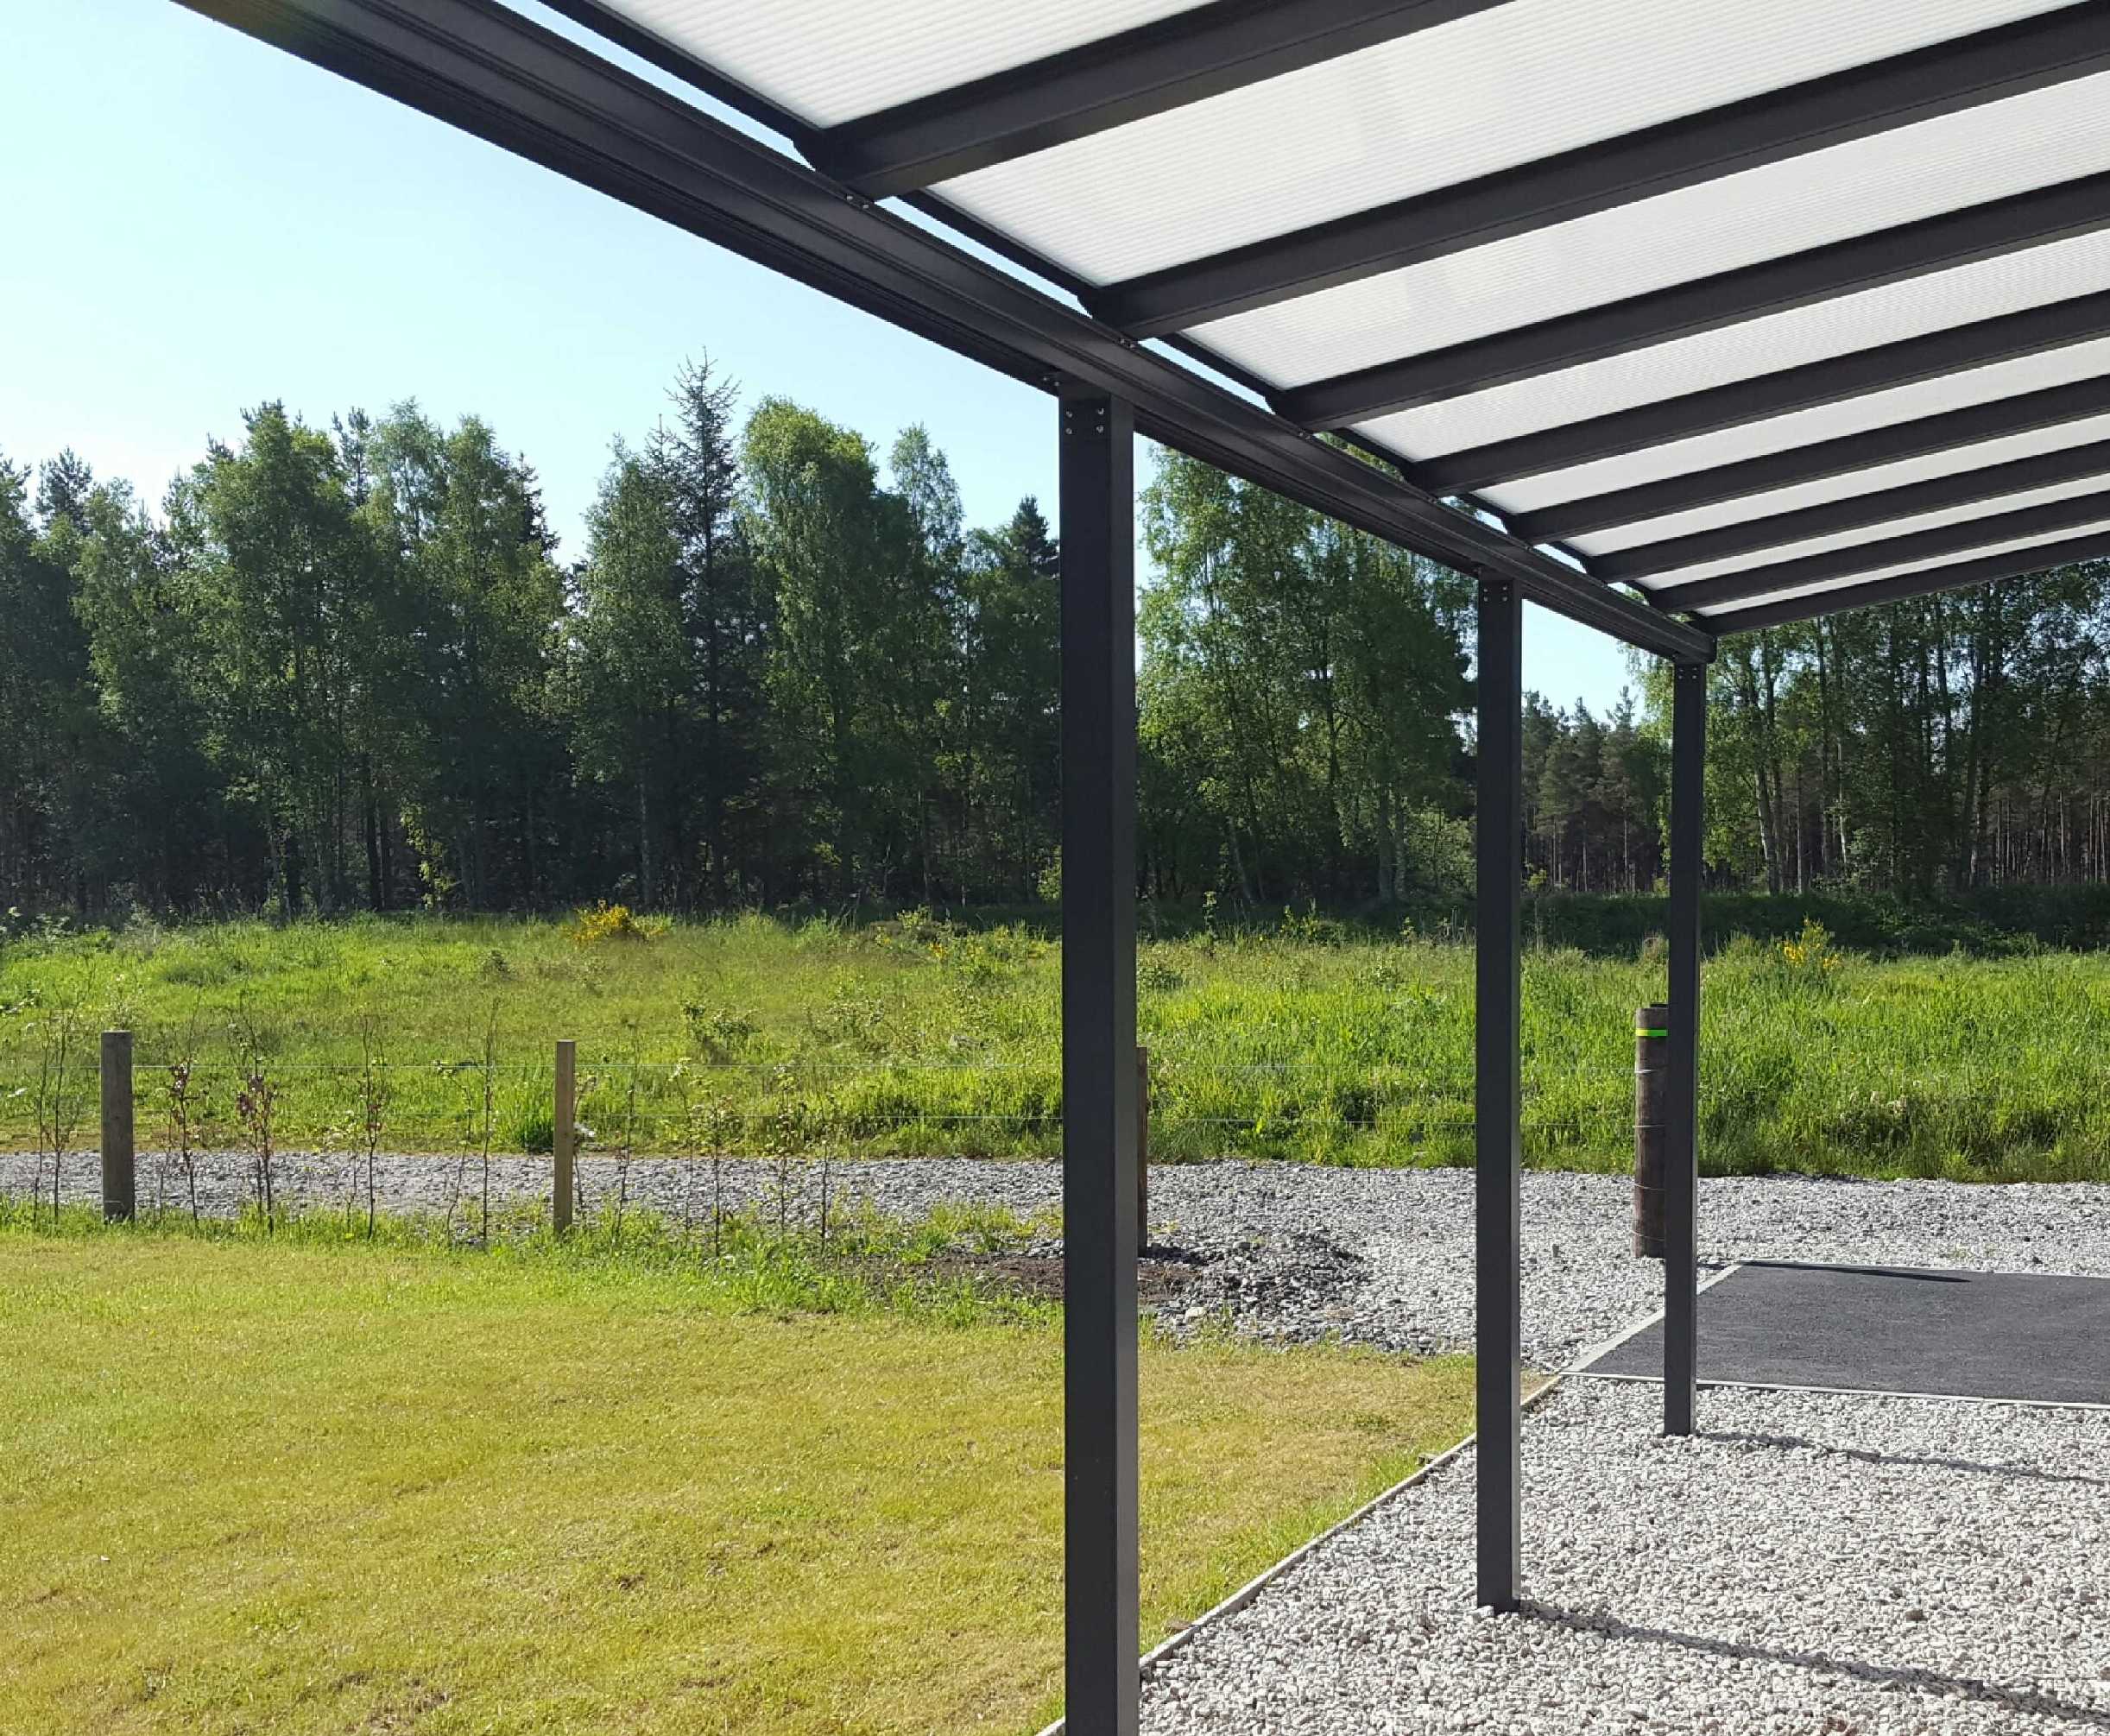 Omega Smart Lean-To Canopy, Anthracite Grey, 16mm Polycarbonate Glazing - 6.3m (W) x 4.5m (P), (4) Supporting Posts